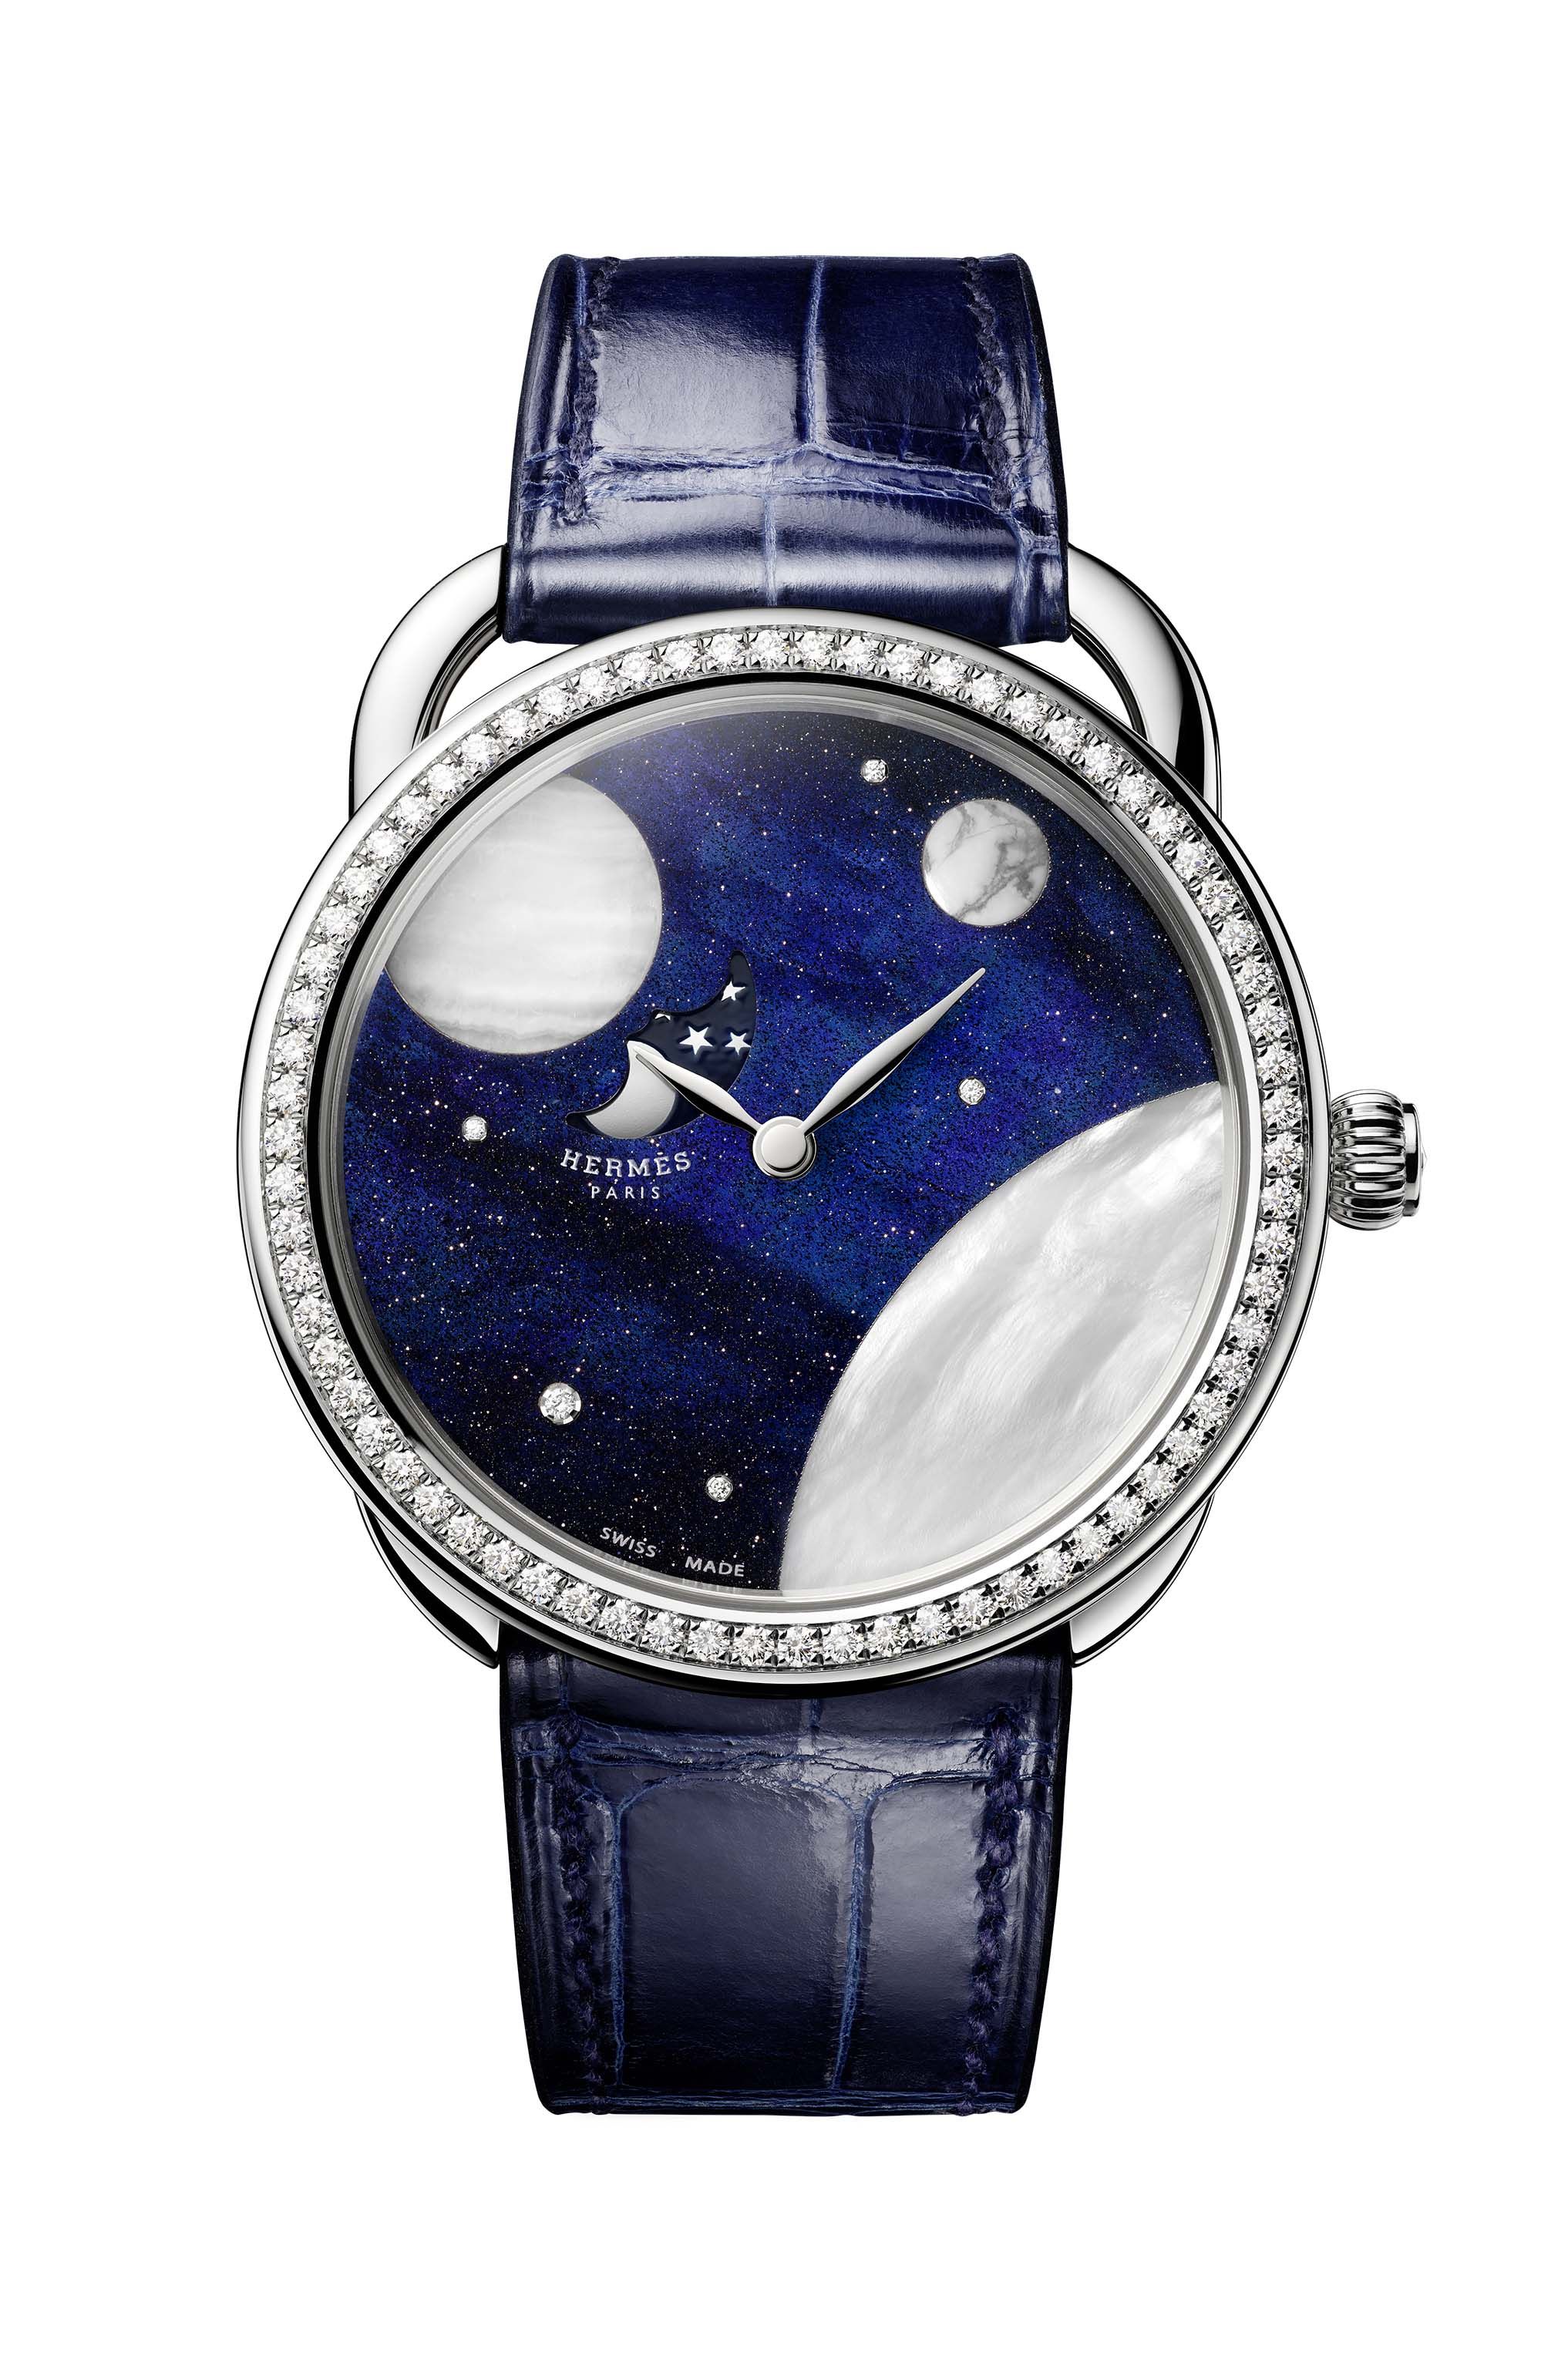 Graham Geo.Graham Orrery Tourbillon Astronomical Watch With Pieces Of The  Moon, Mars, & Earth | aBlogtoWatch